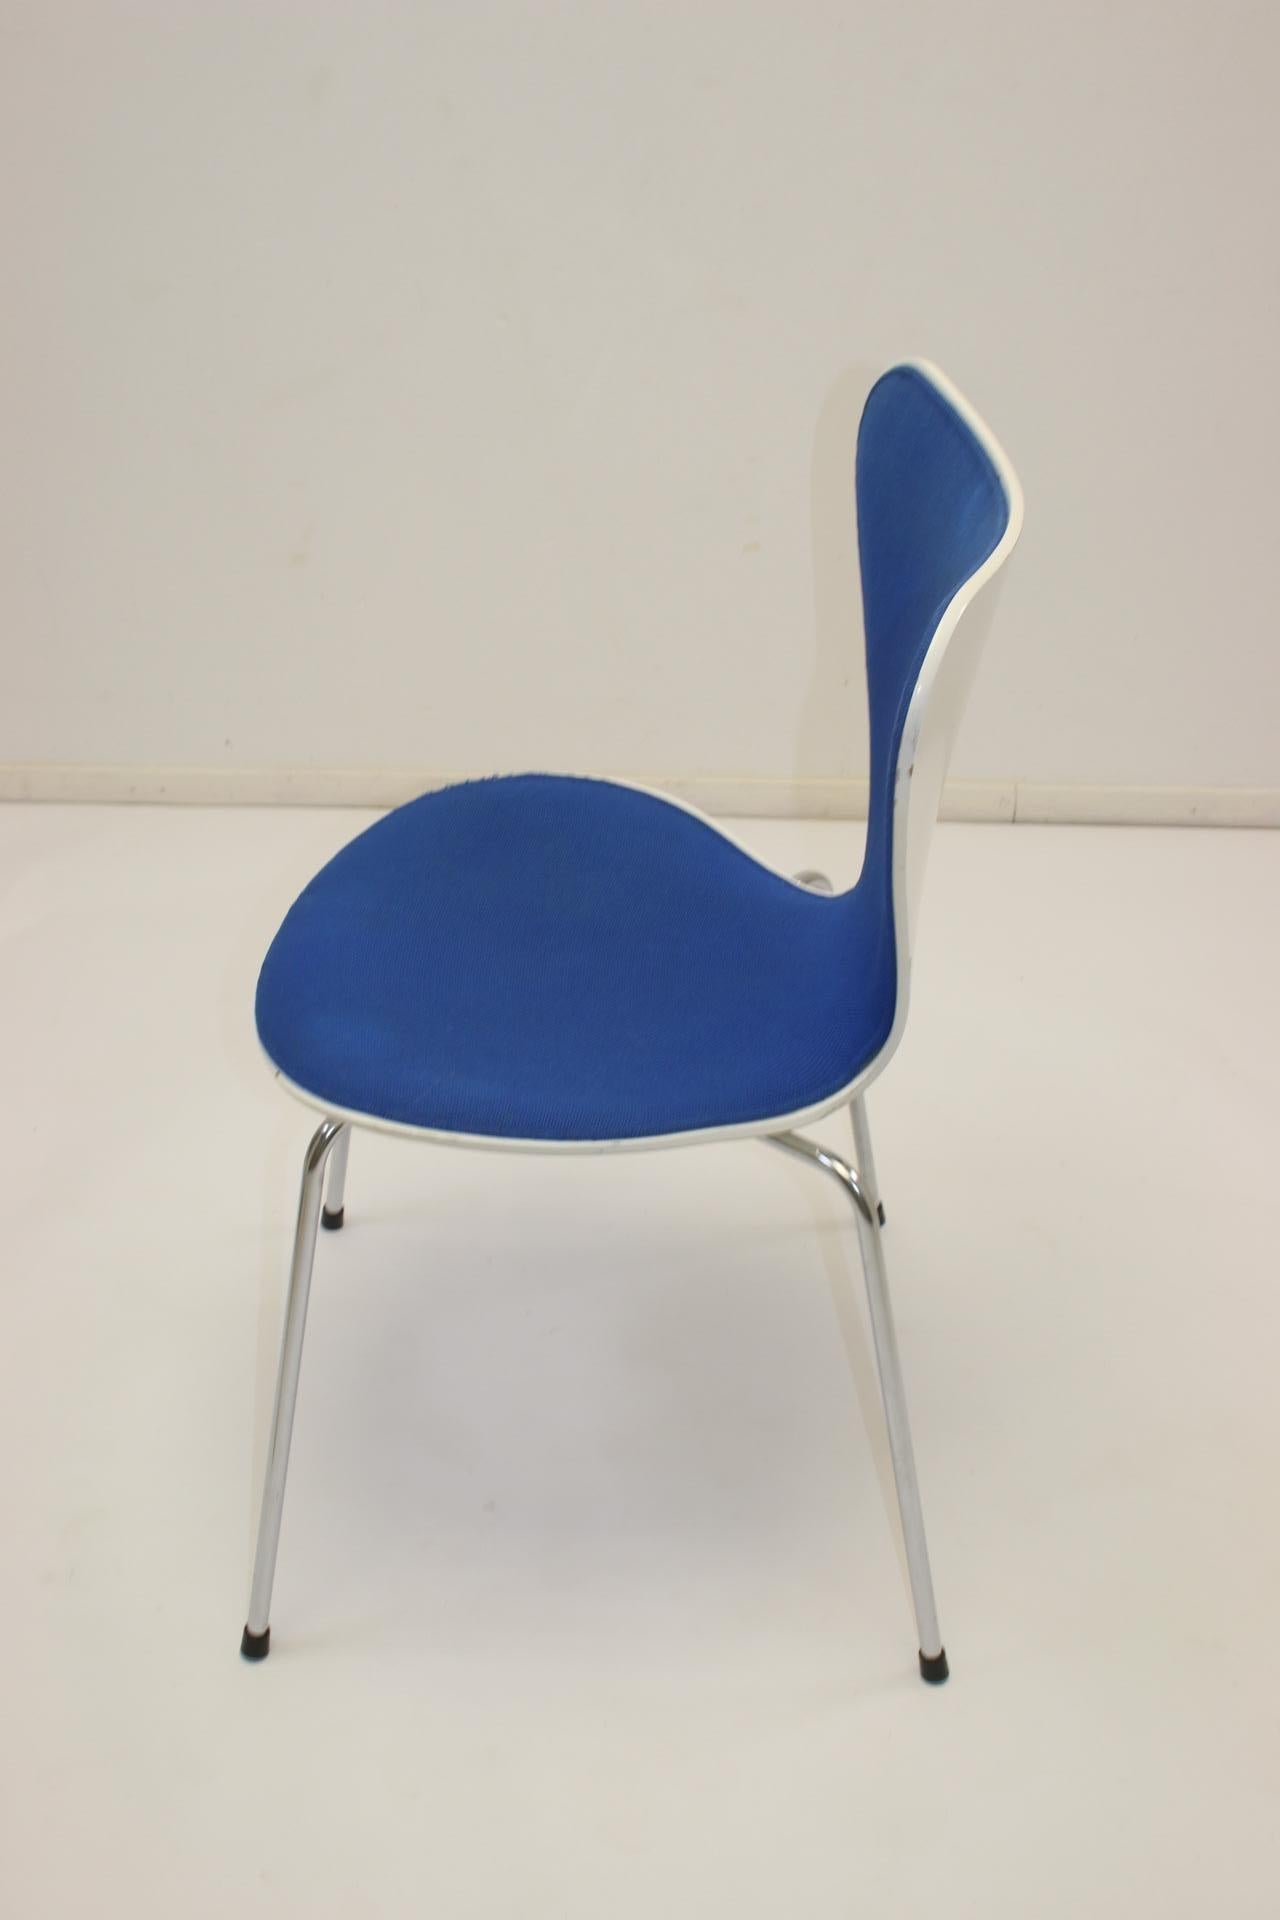 The butterfly chair is a design by Arne Jacobsen from 1953 and is also called 'Series 7'. The chair is one of the most successful chairs ever. The popularity of Arne Jacobsen's butterfly chair seems unbeatable even today.

The main reason for the